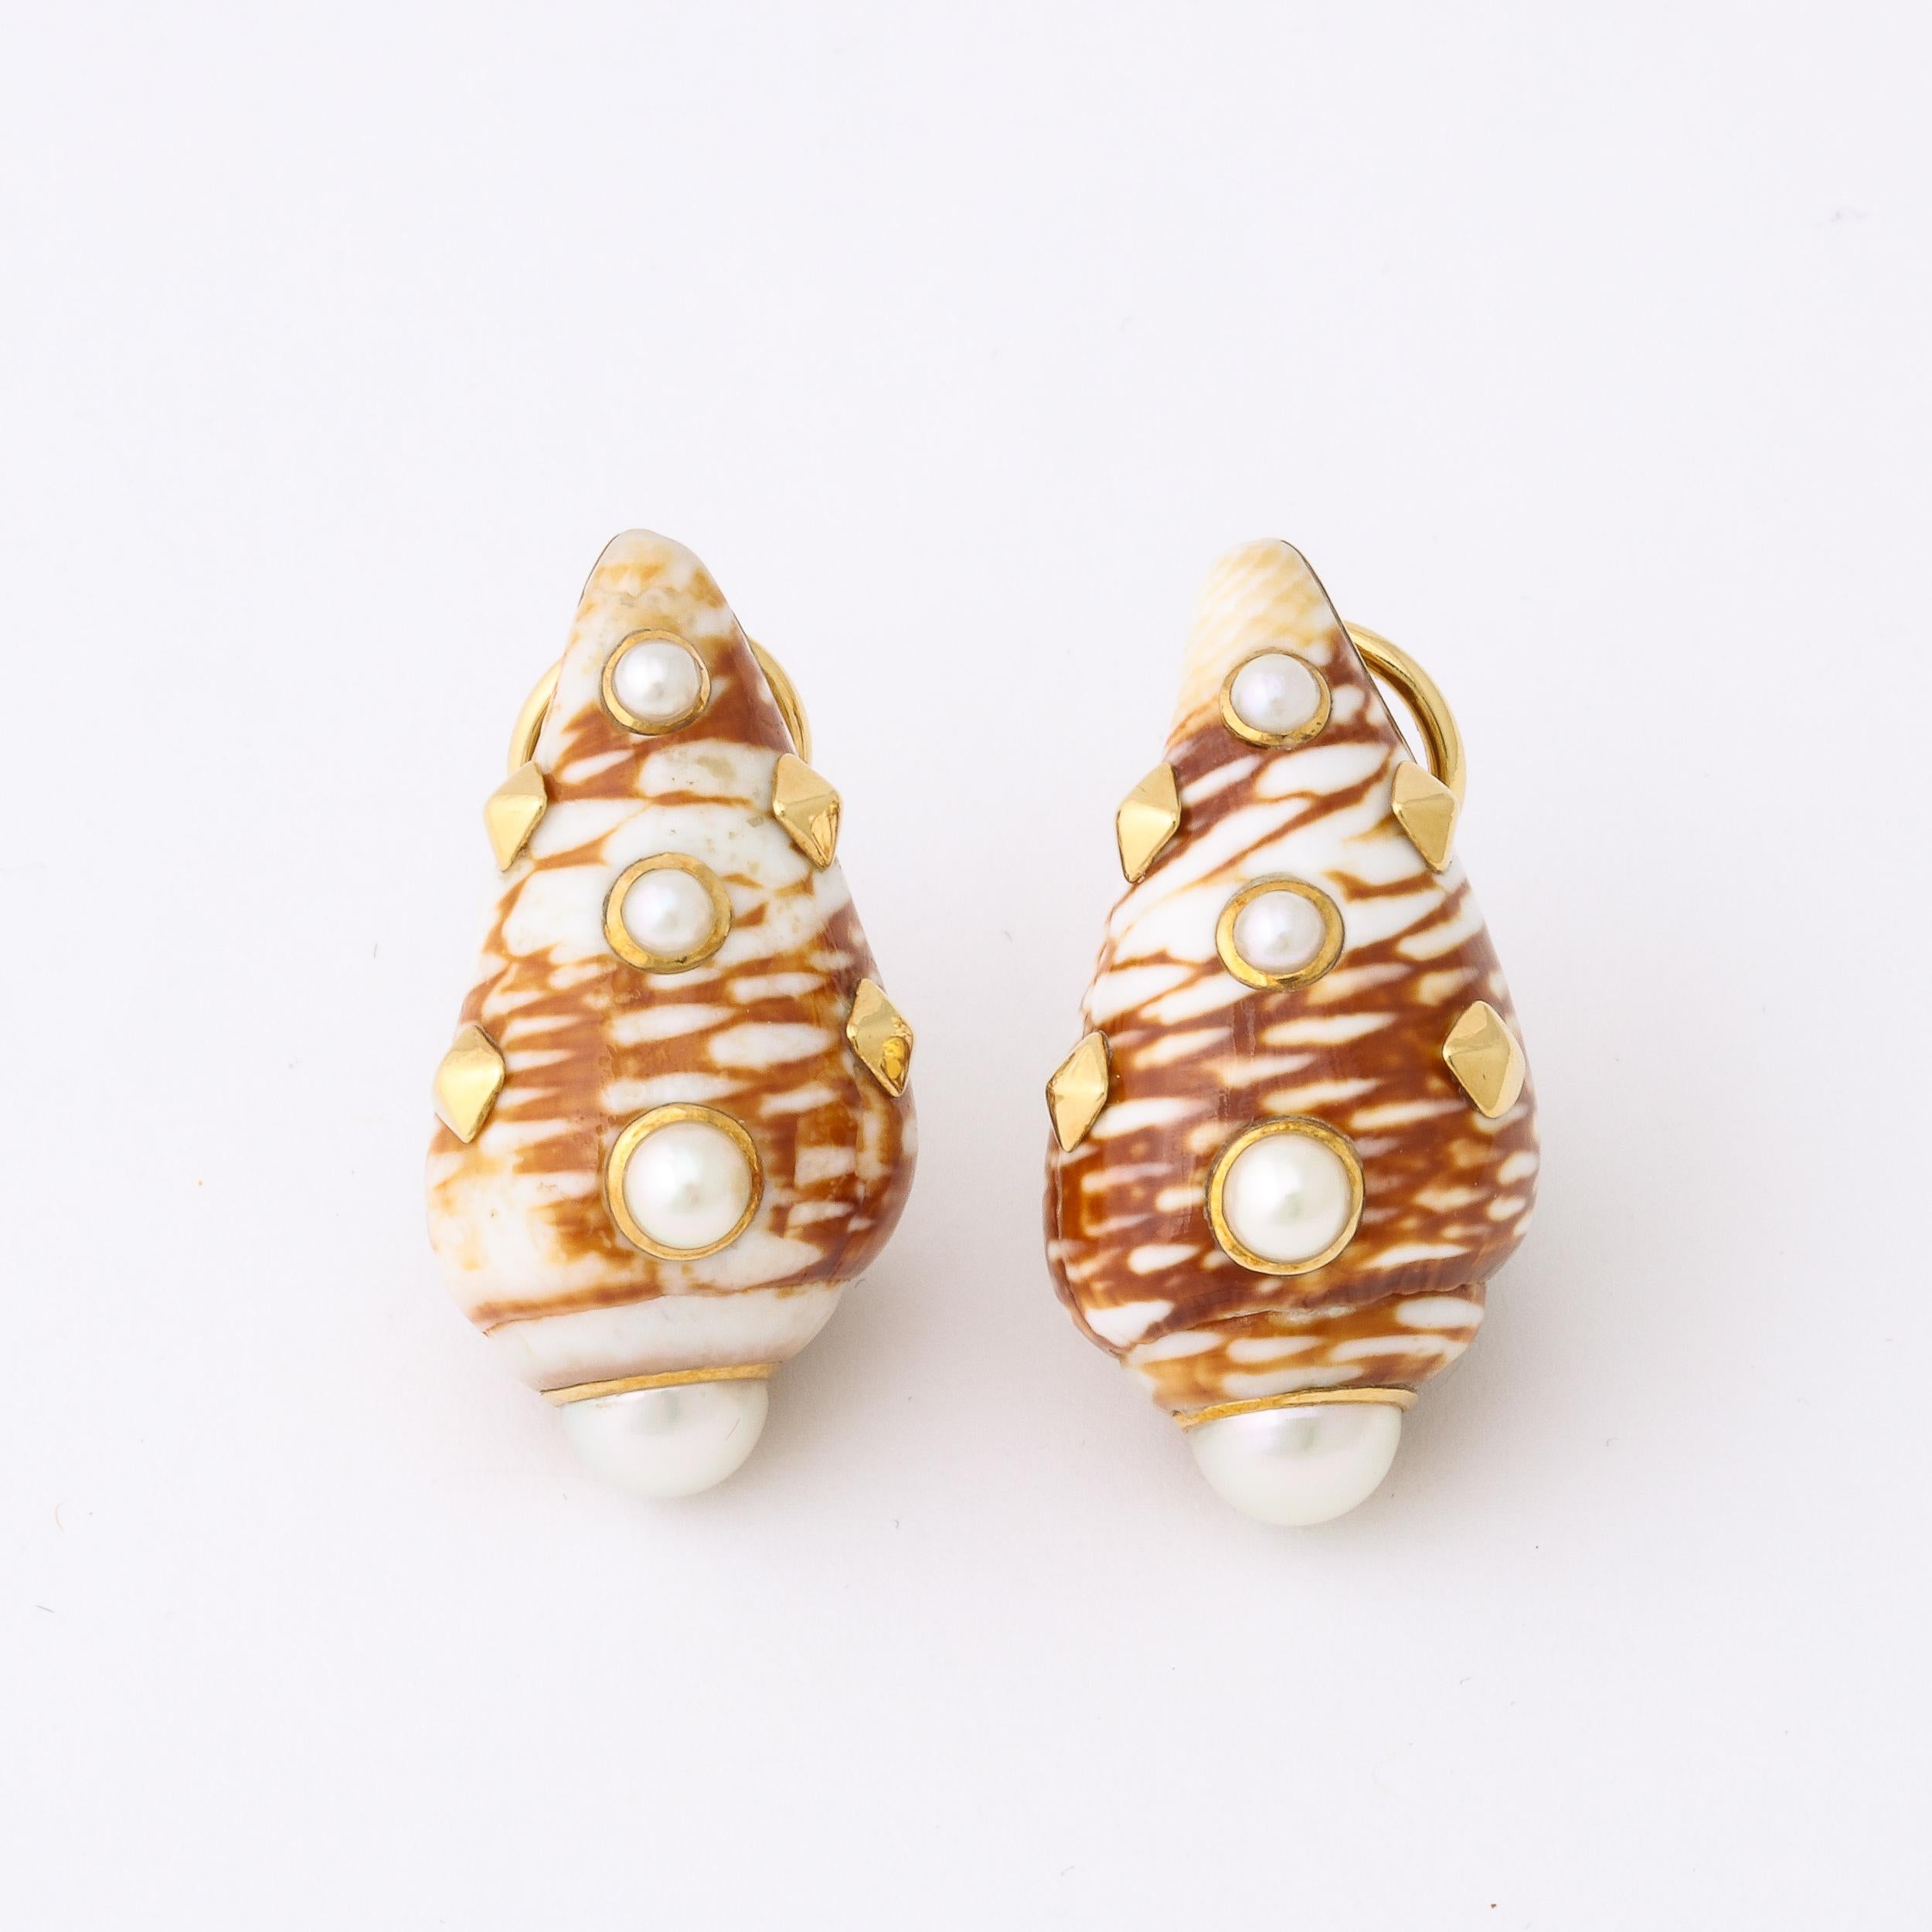 Red & Beige Shell Earrings Set in 18k Gold With Inlaid Pearls by Trianon In Excellent Condition For Sale In New York, NY